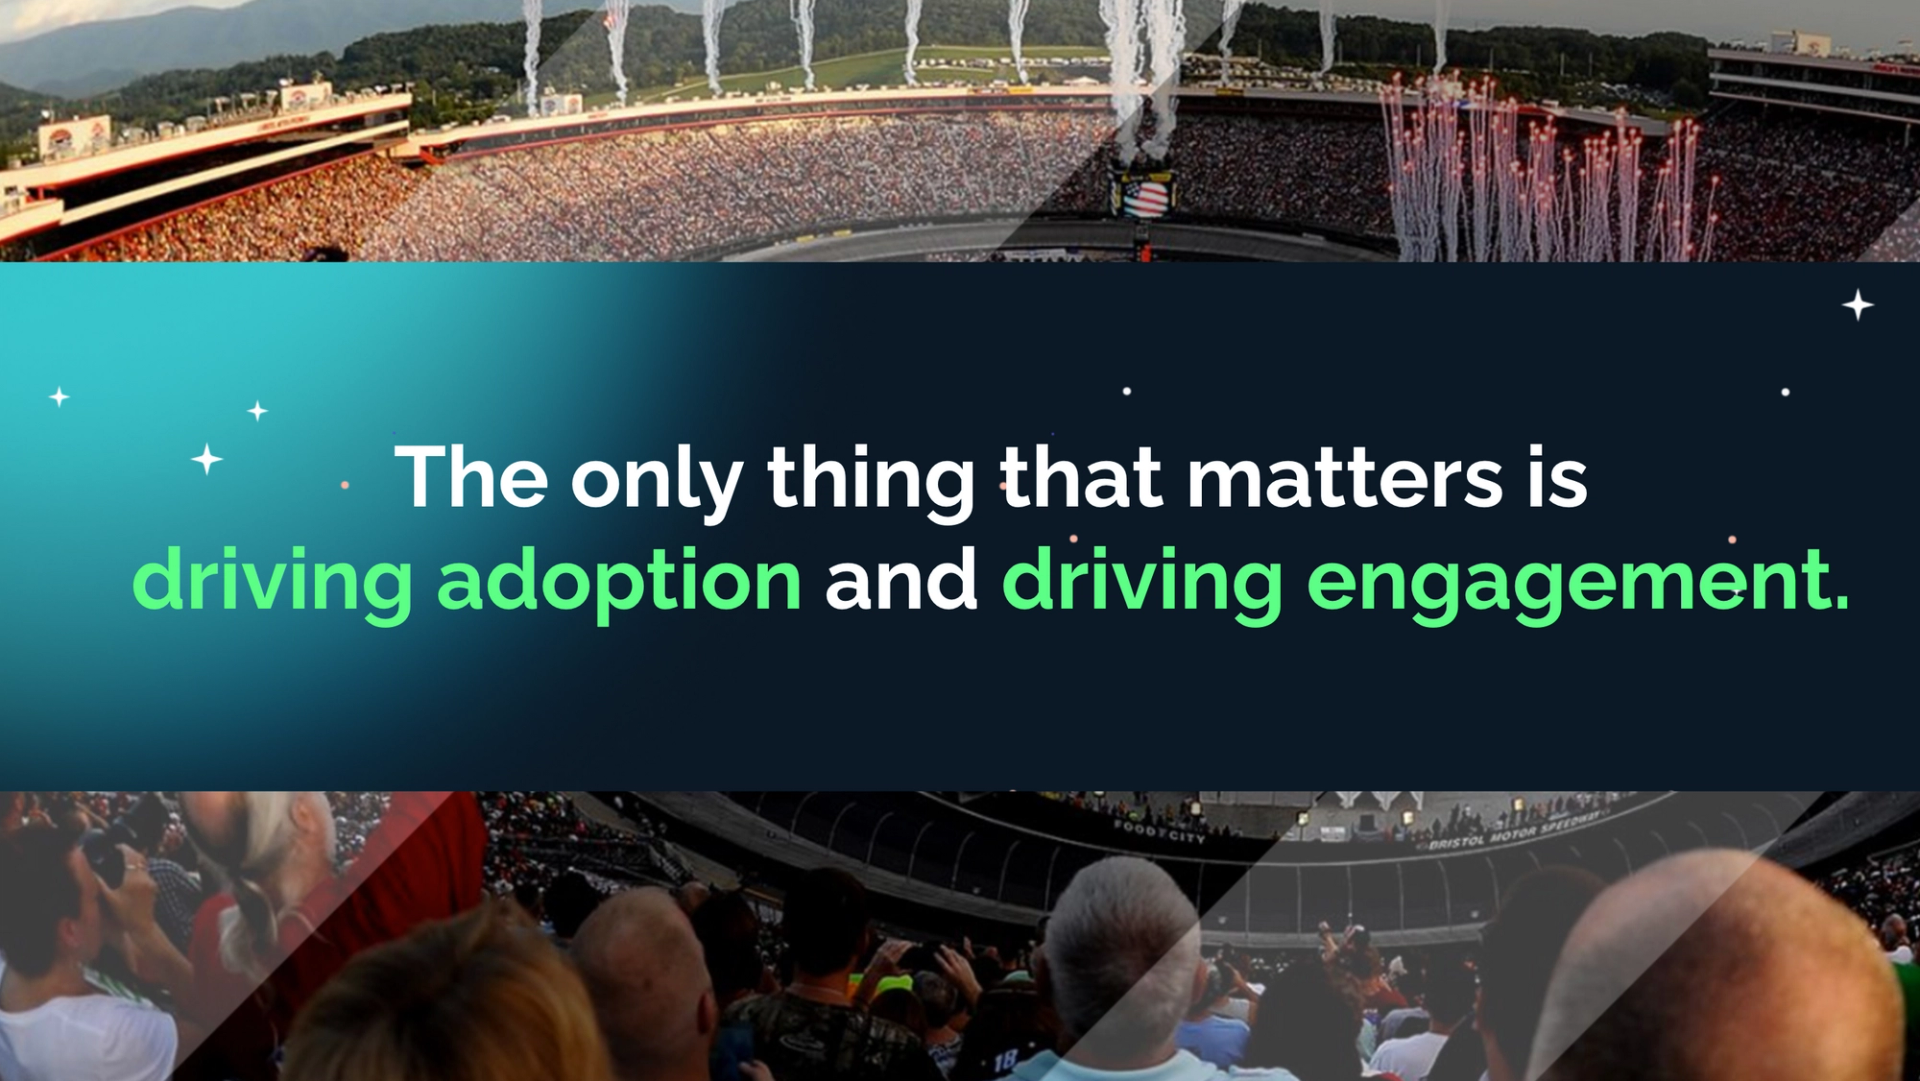 The only thing that matters is driving adoption and driving engagement.